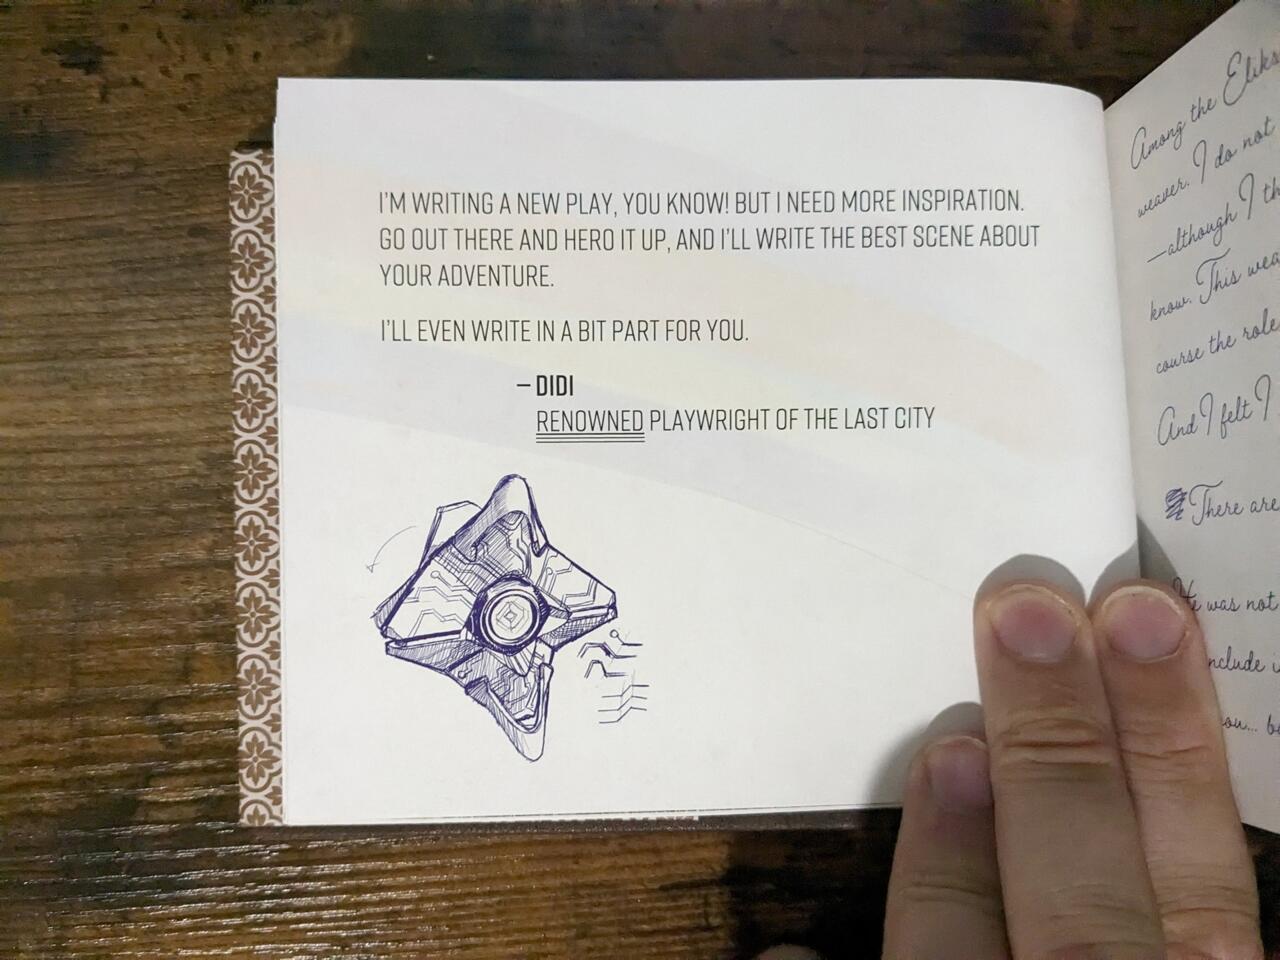 There are some funny and emotional moments in the autograph book if you're up on Destiny 2's lore.